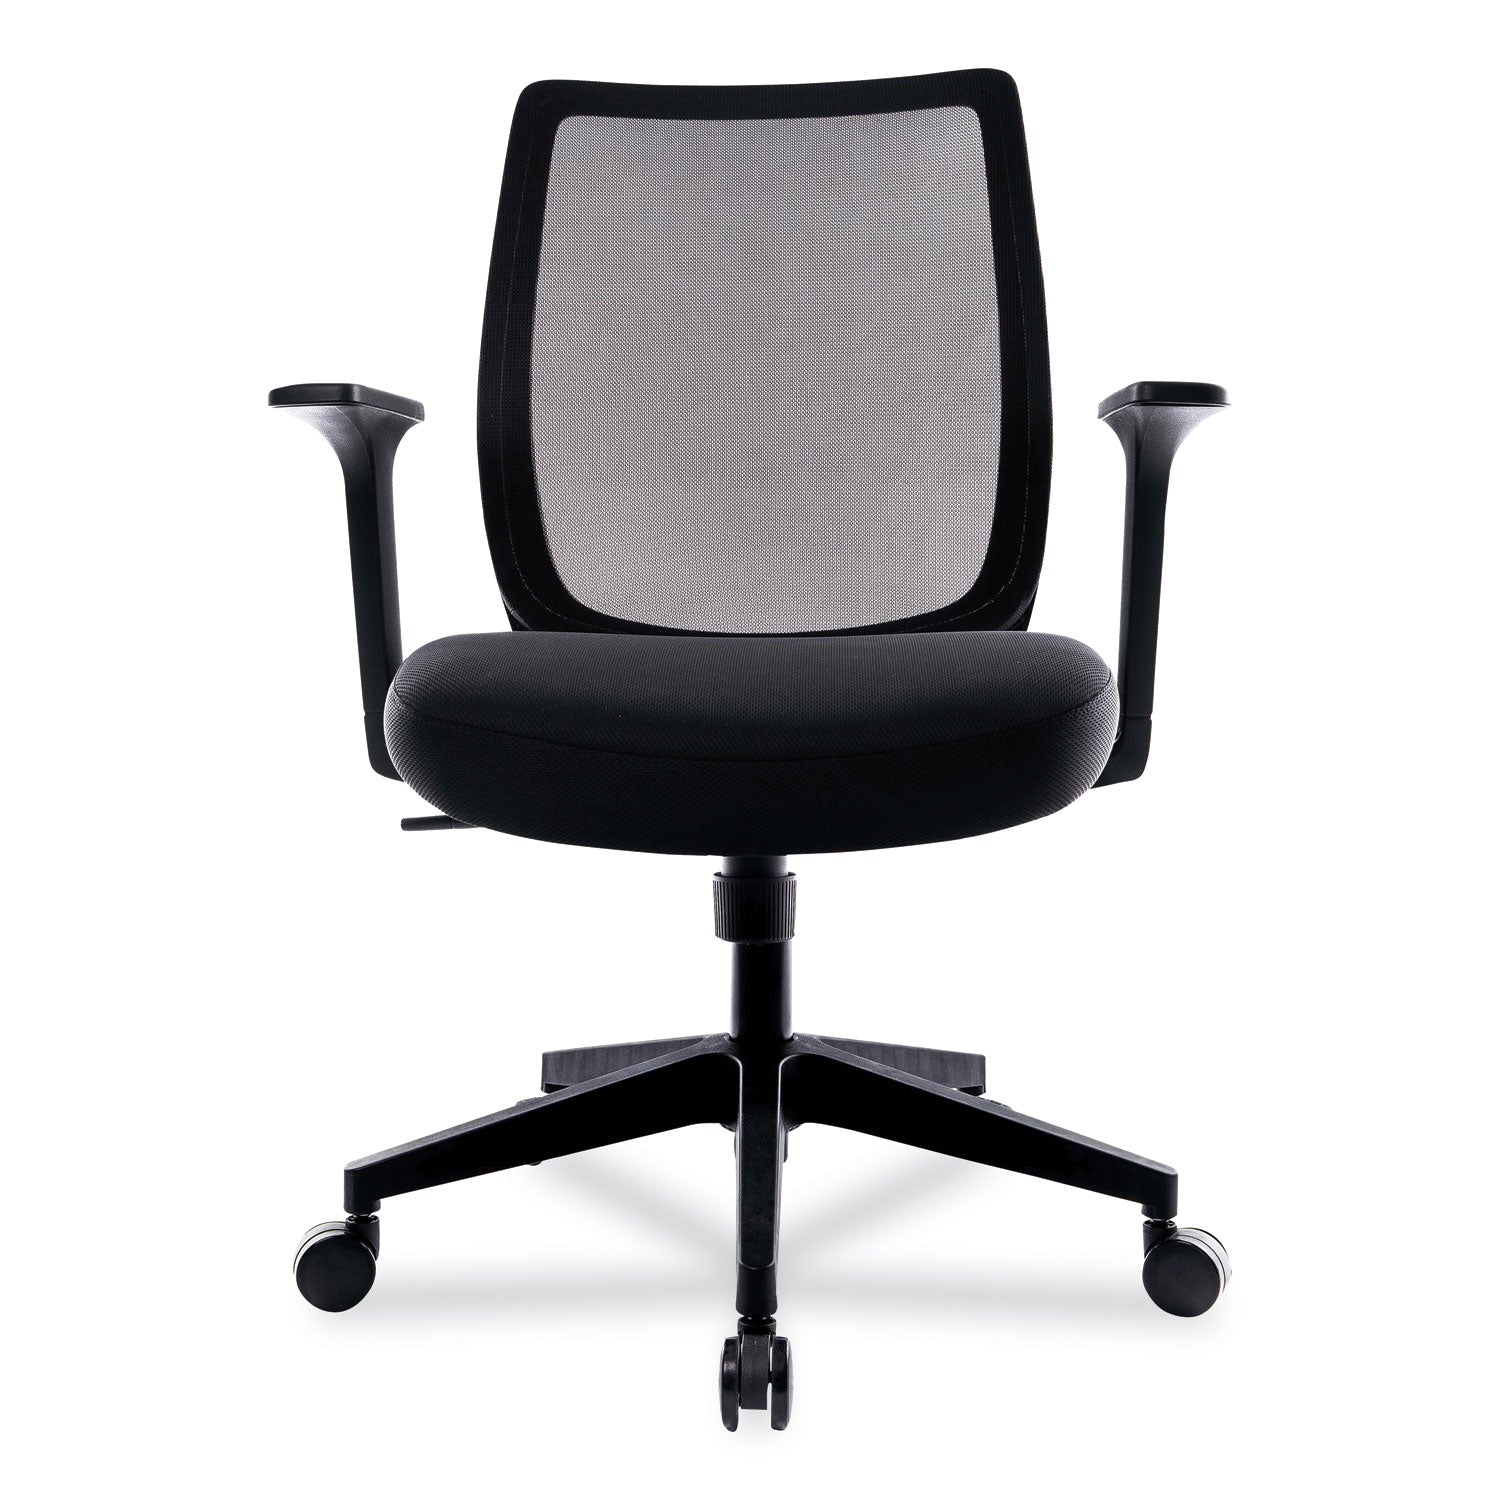 essentials-mesh-back-fabric-task-chair-with-arms-supports-up-to-275-lb-black-fabric-seat-black-mesh-back-black-base_uos24398920 - 2